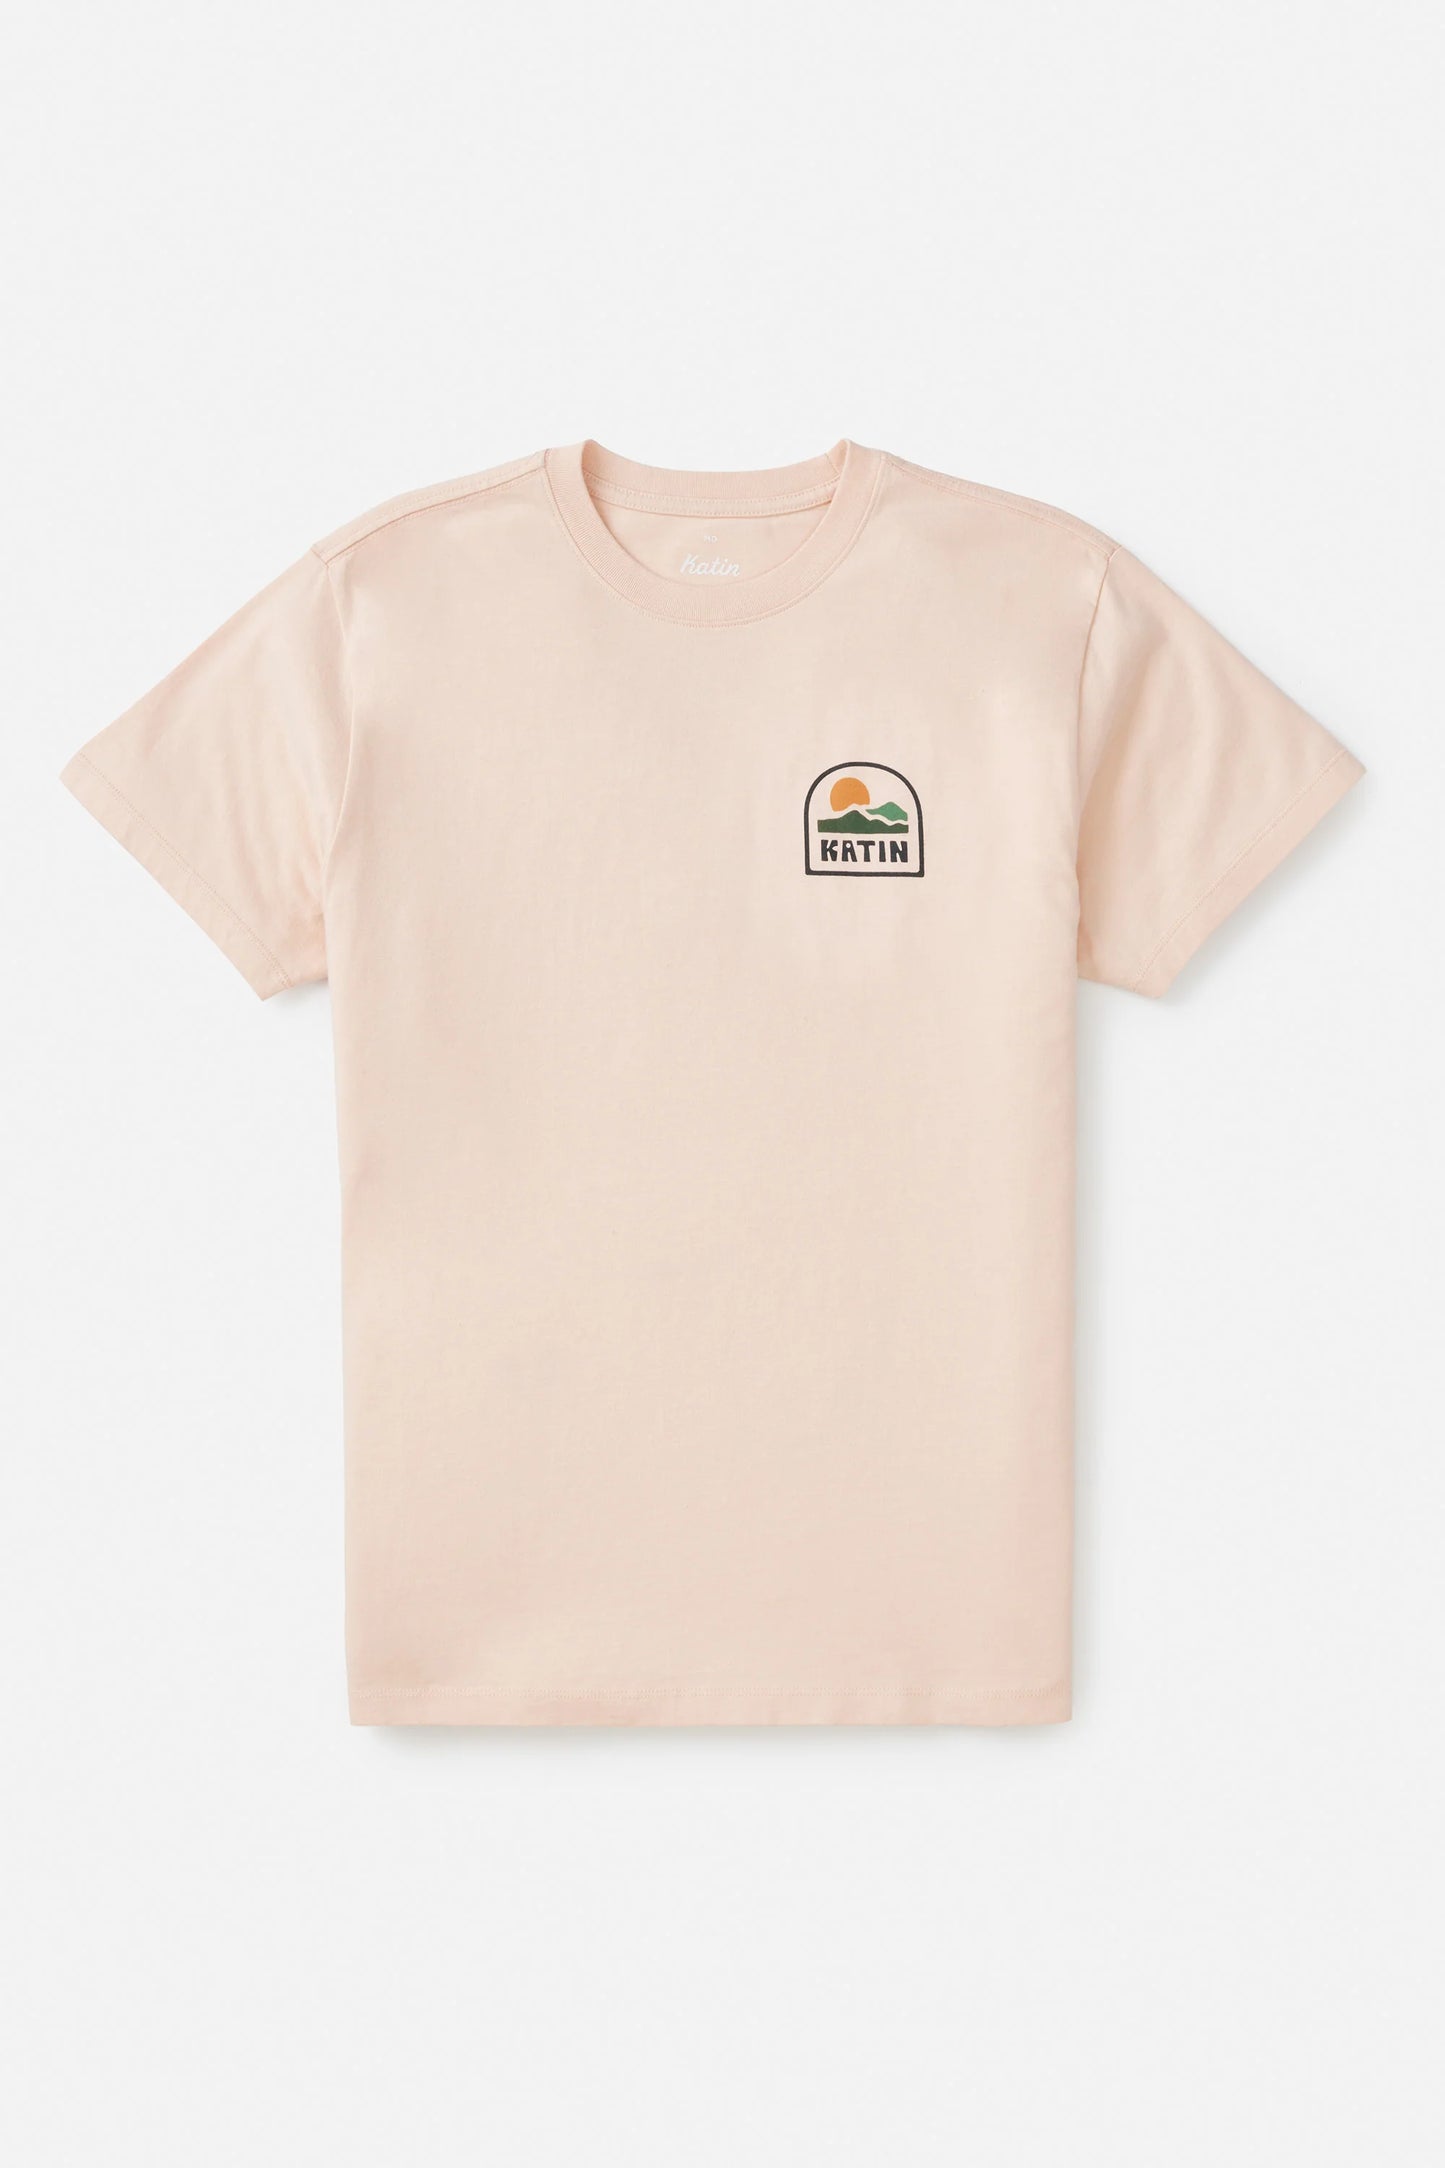 Flat Lay view of the pink Ortega Short Sleeve Tee by Katin